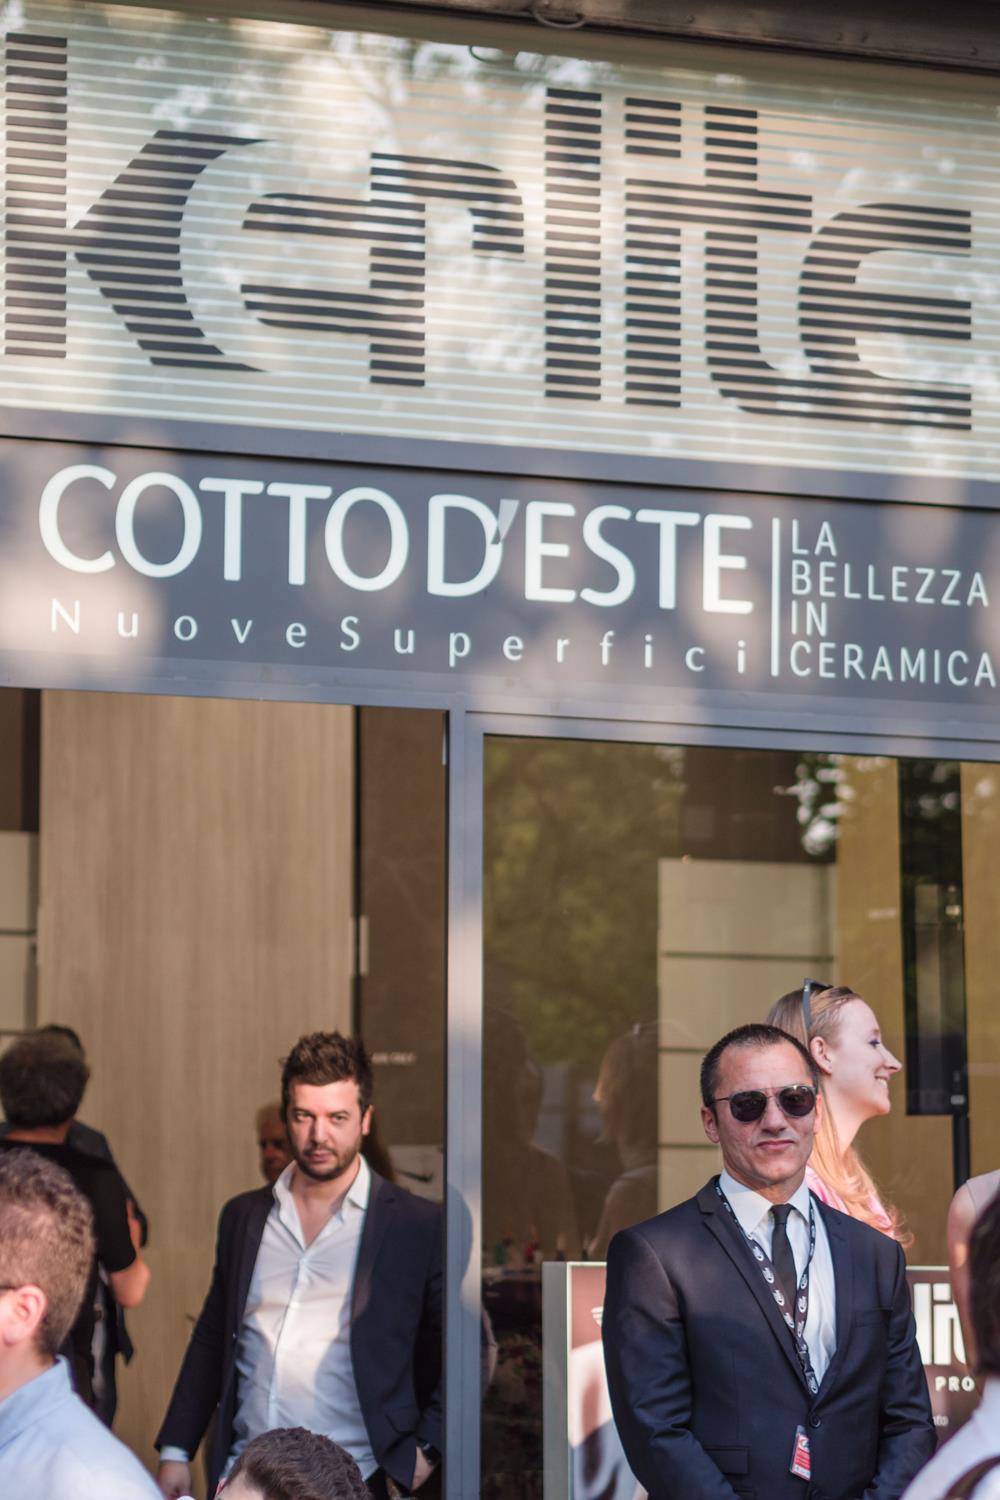 Cotto d’Este at the Fuorisalone - Night out: Photo 1